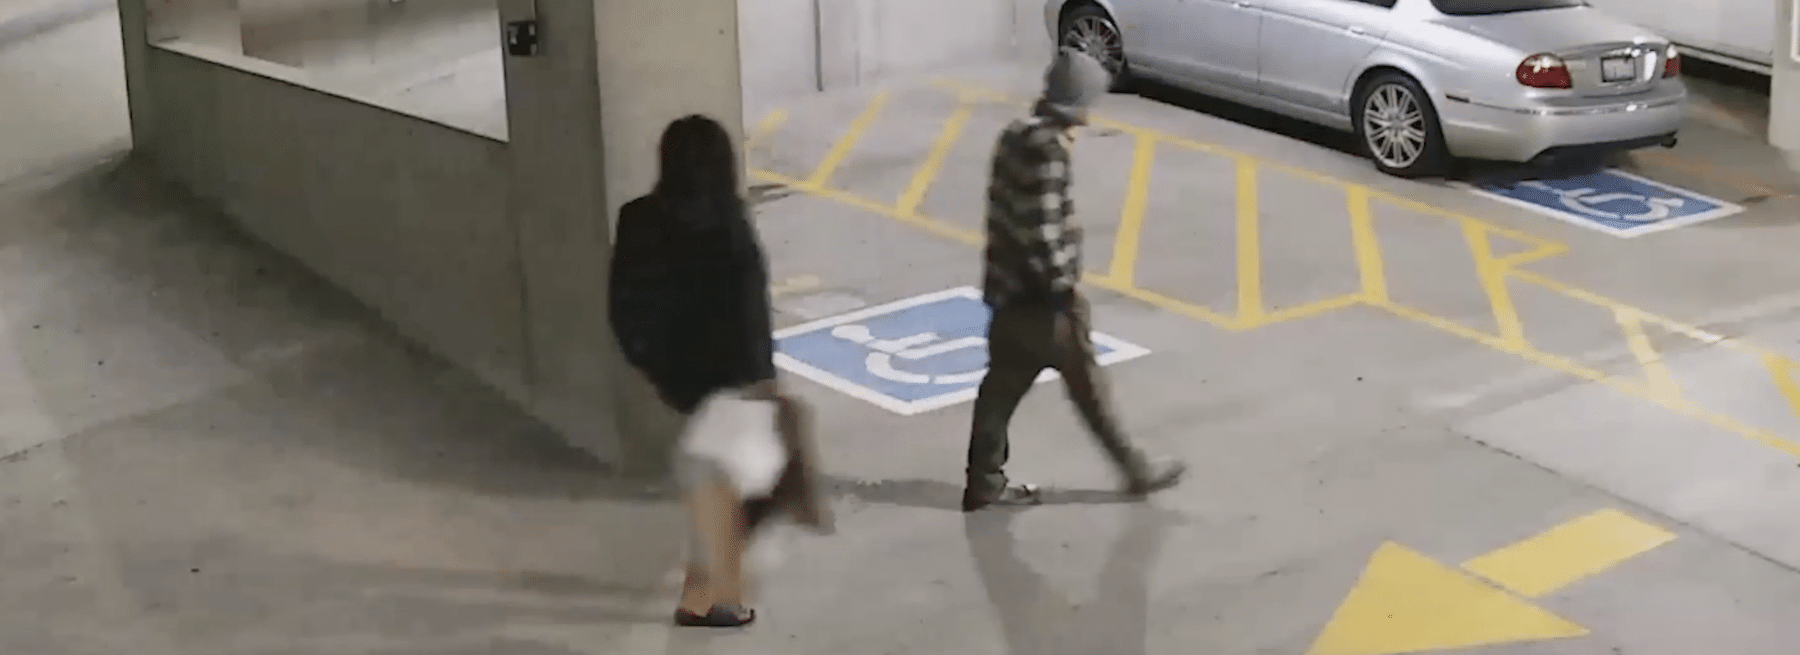 Two people tailgating into an apartment parking garage